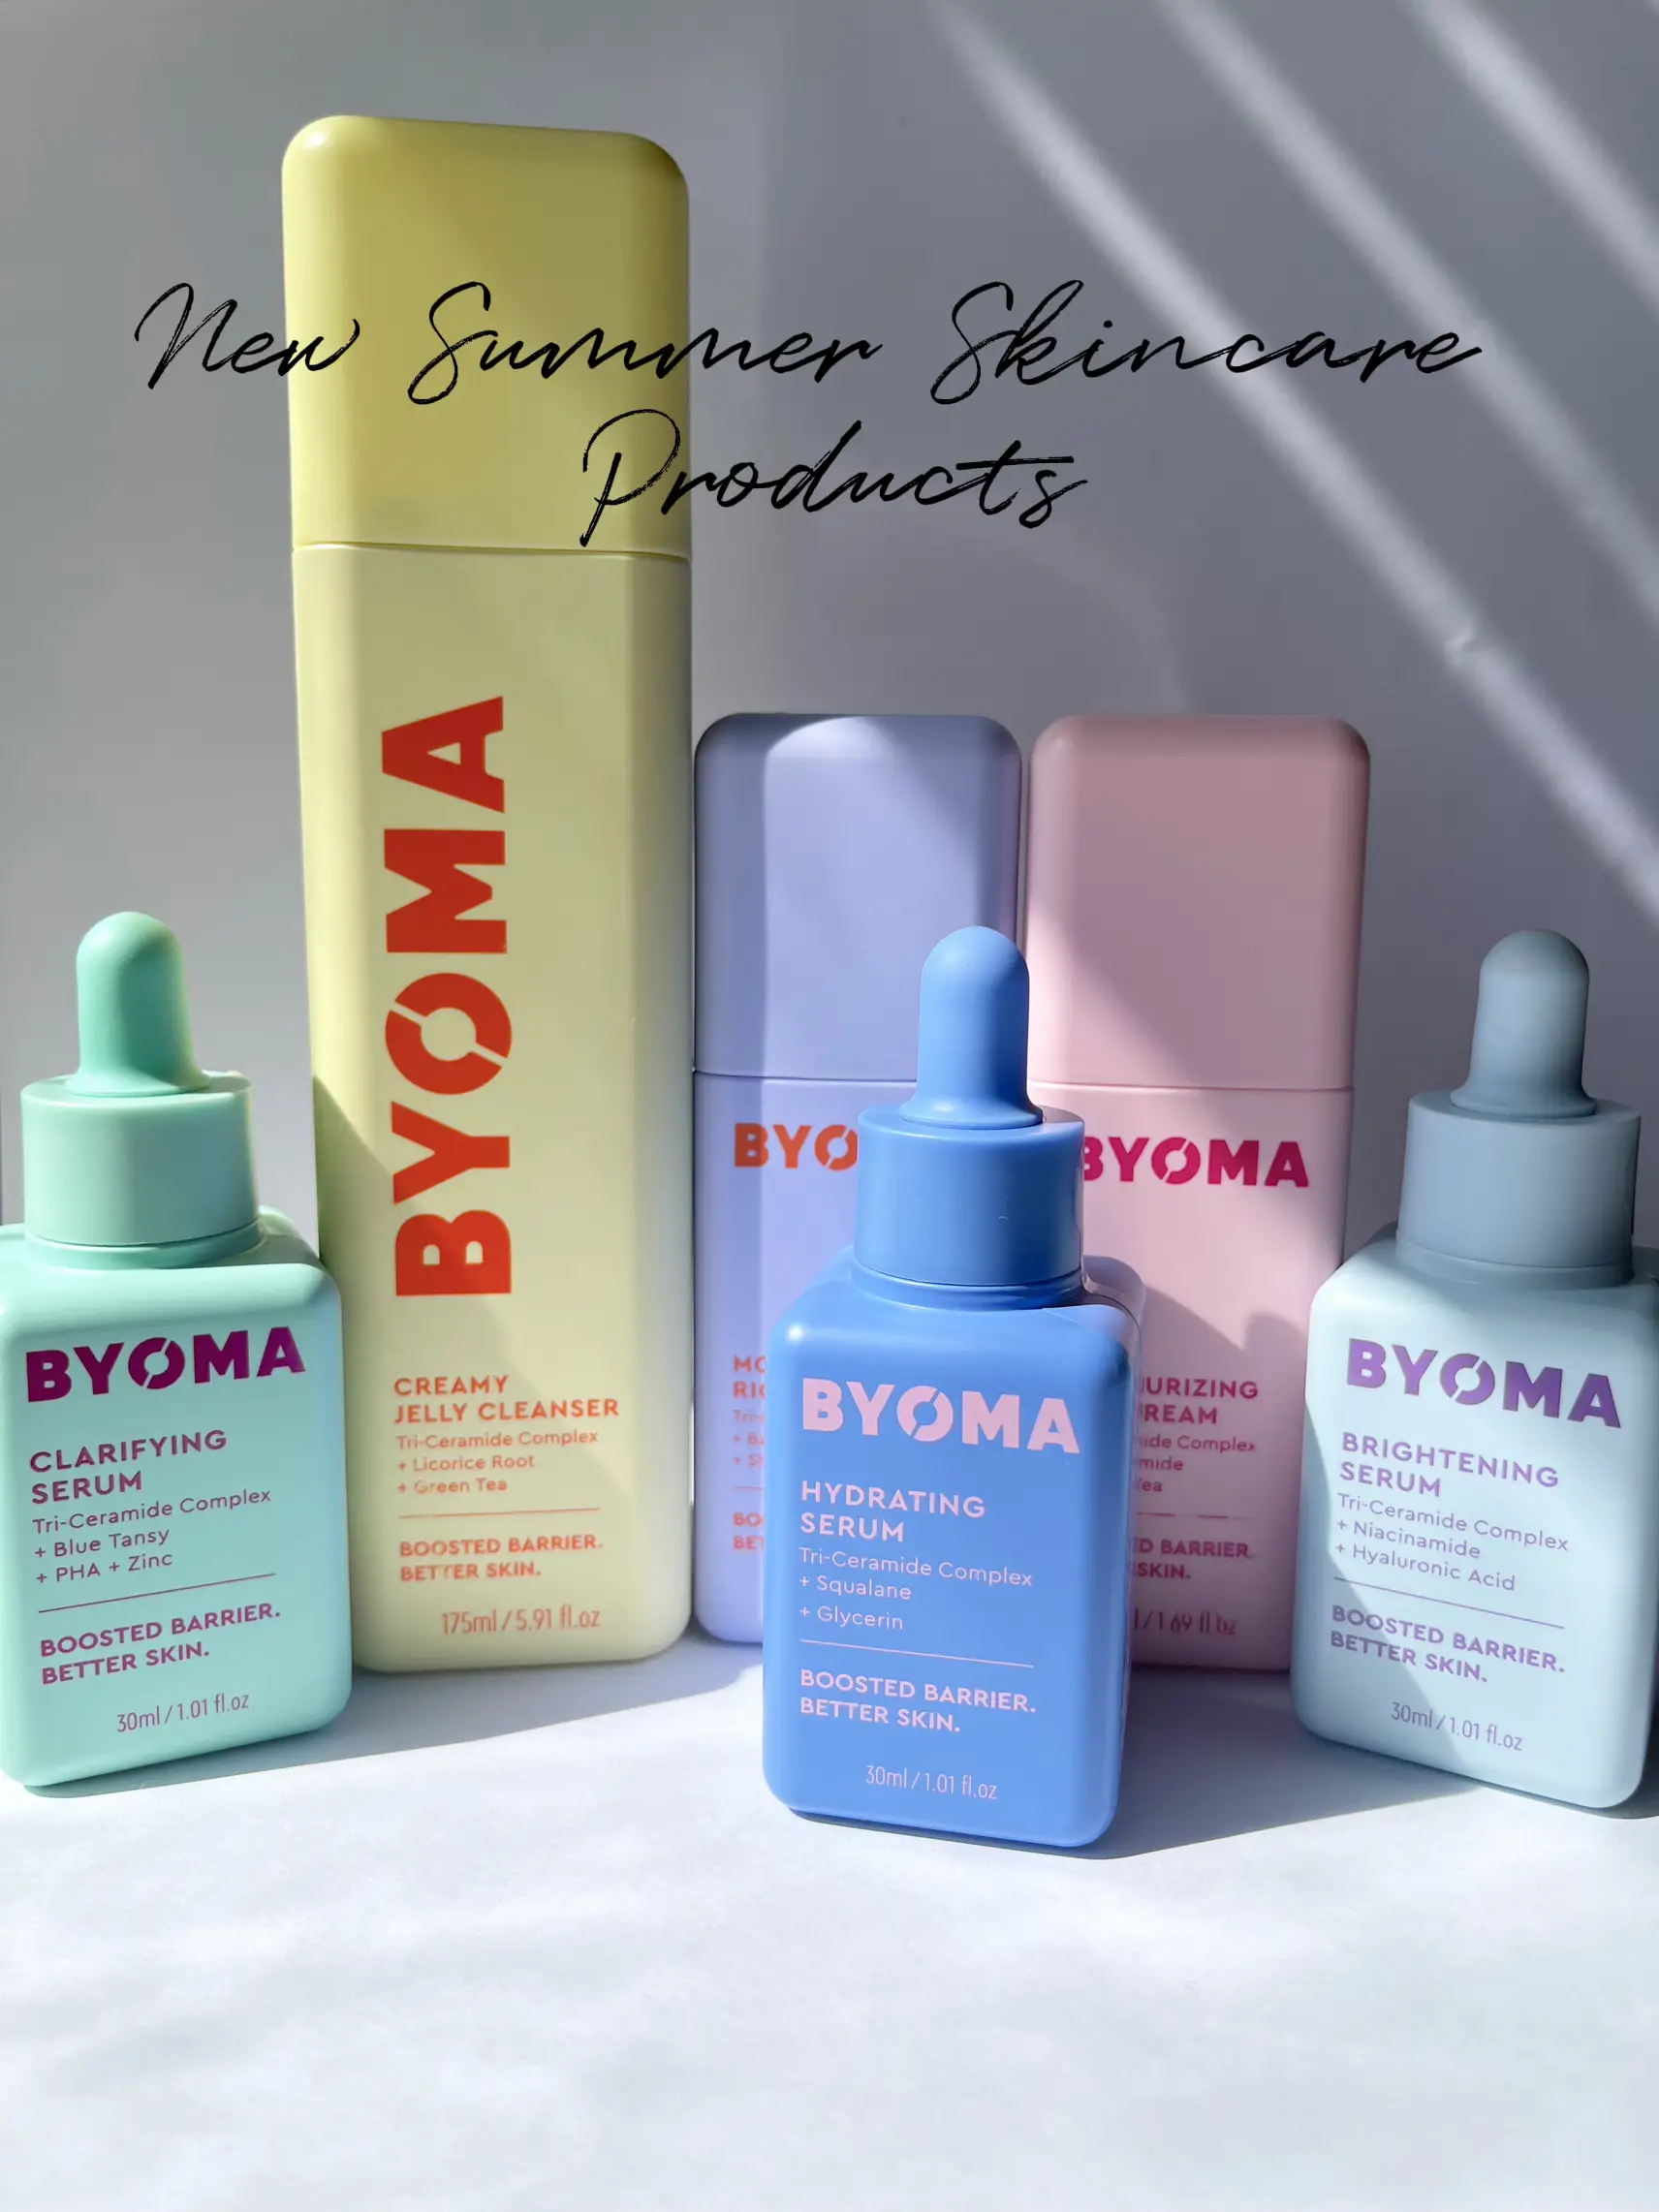 About BYOMA Skin Care